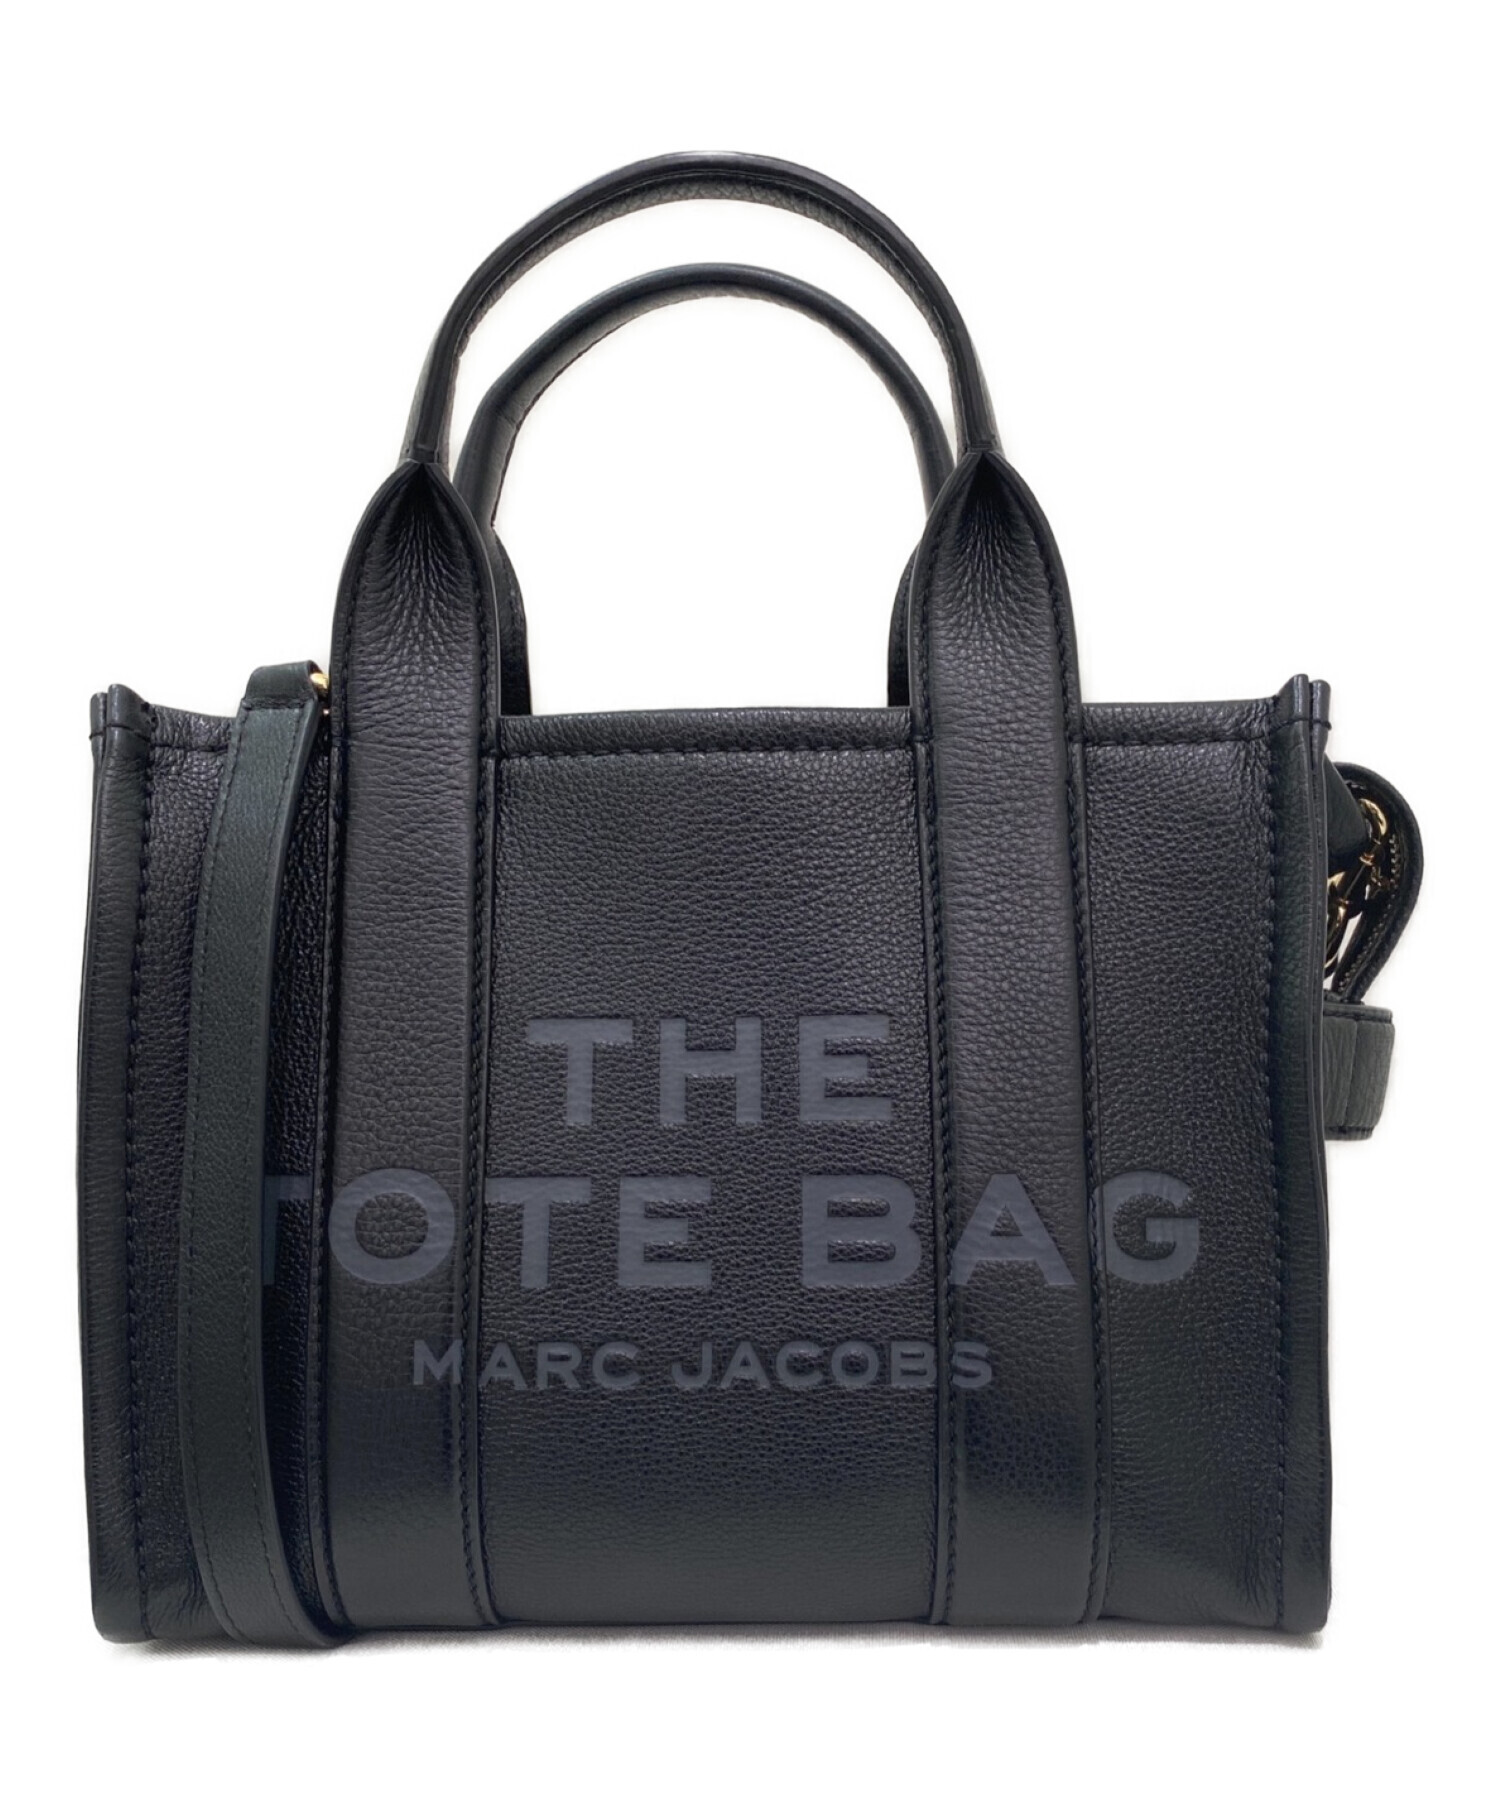 MARC JACOBS (マークジェイコブス) THE LEATHER MINI TOTE BAG ブラック